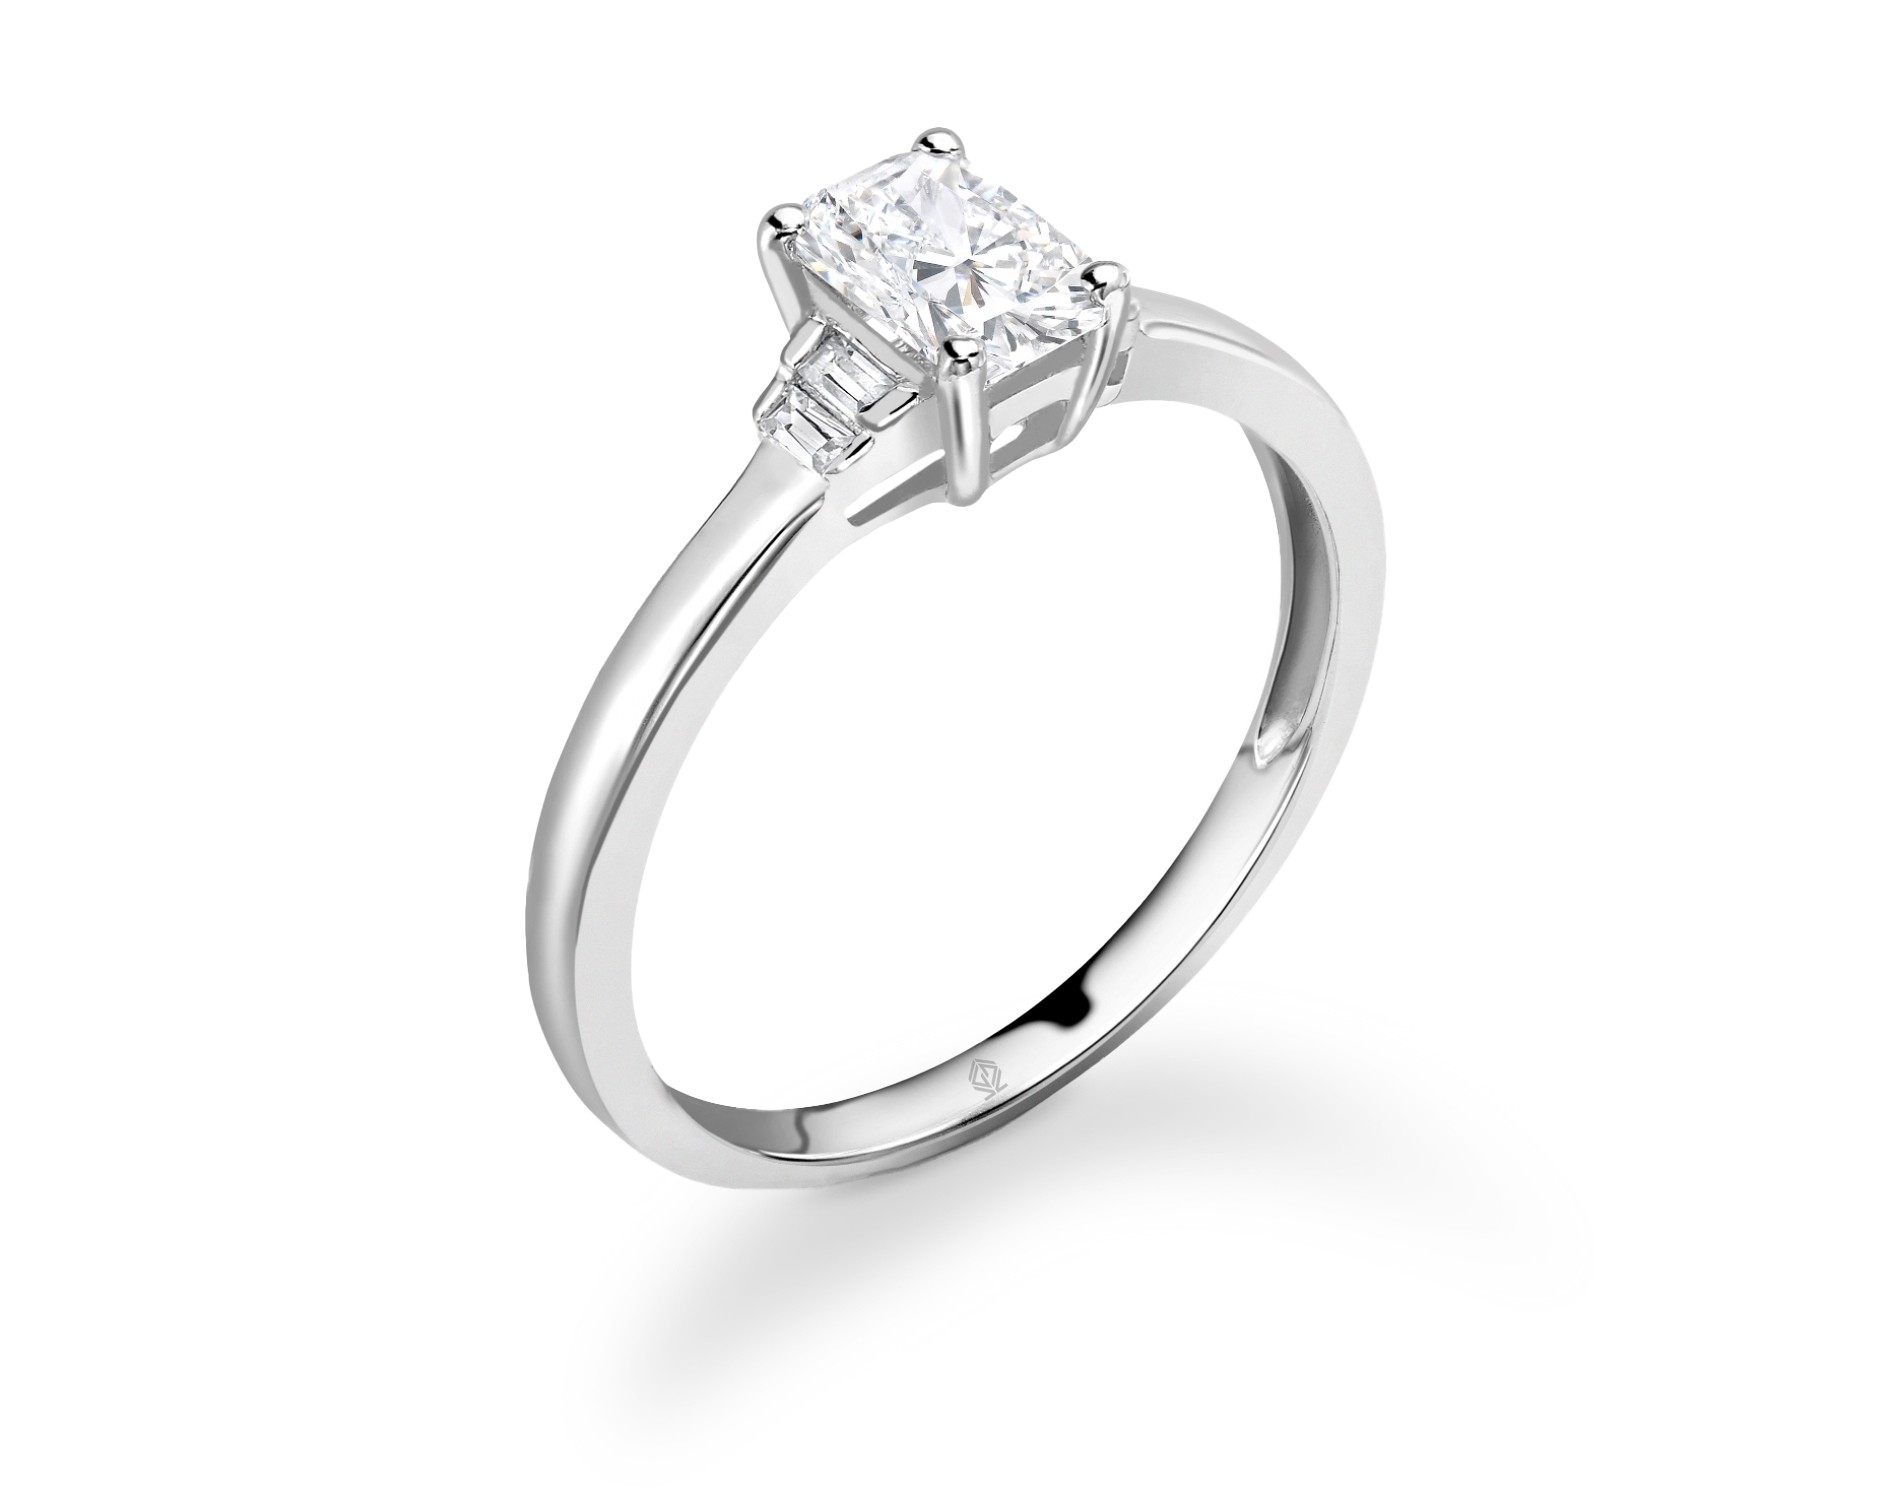 18K WHITE GOLD RADIANT CUT DIAMOND RING WITH BAGUETTES CUT SIDE STONES